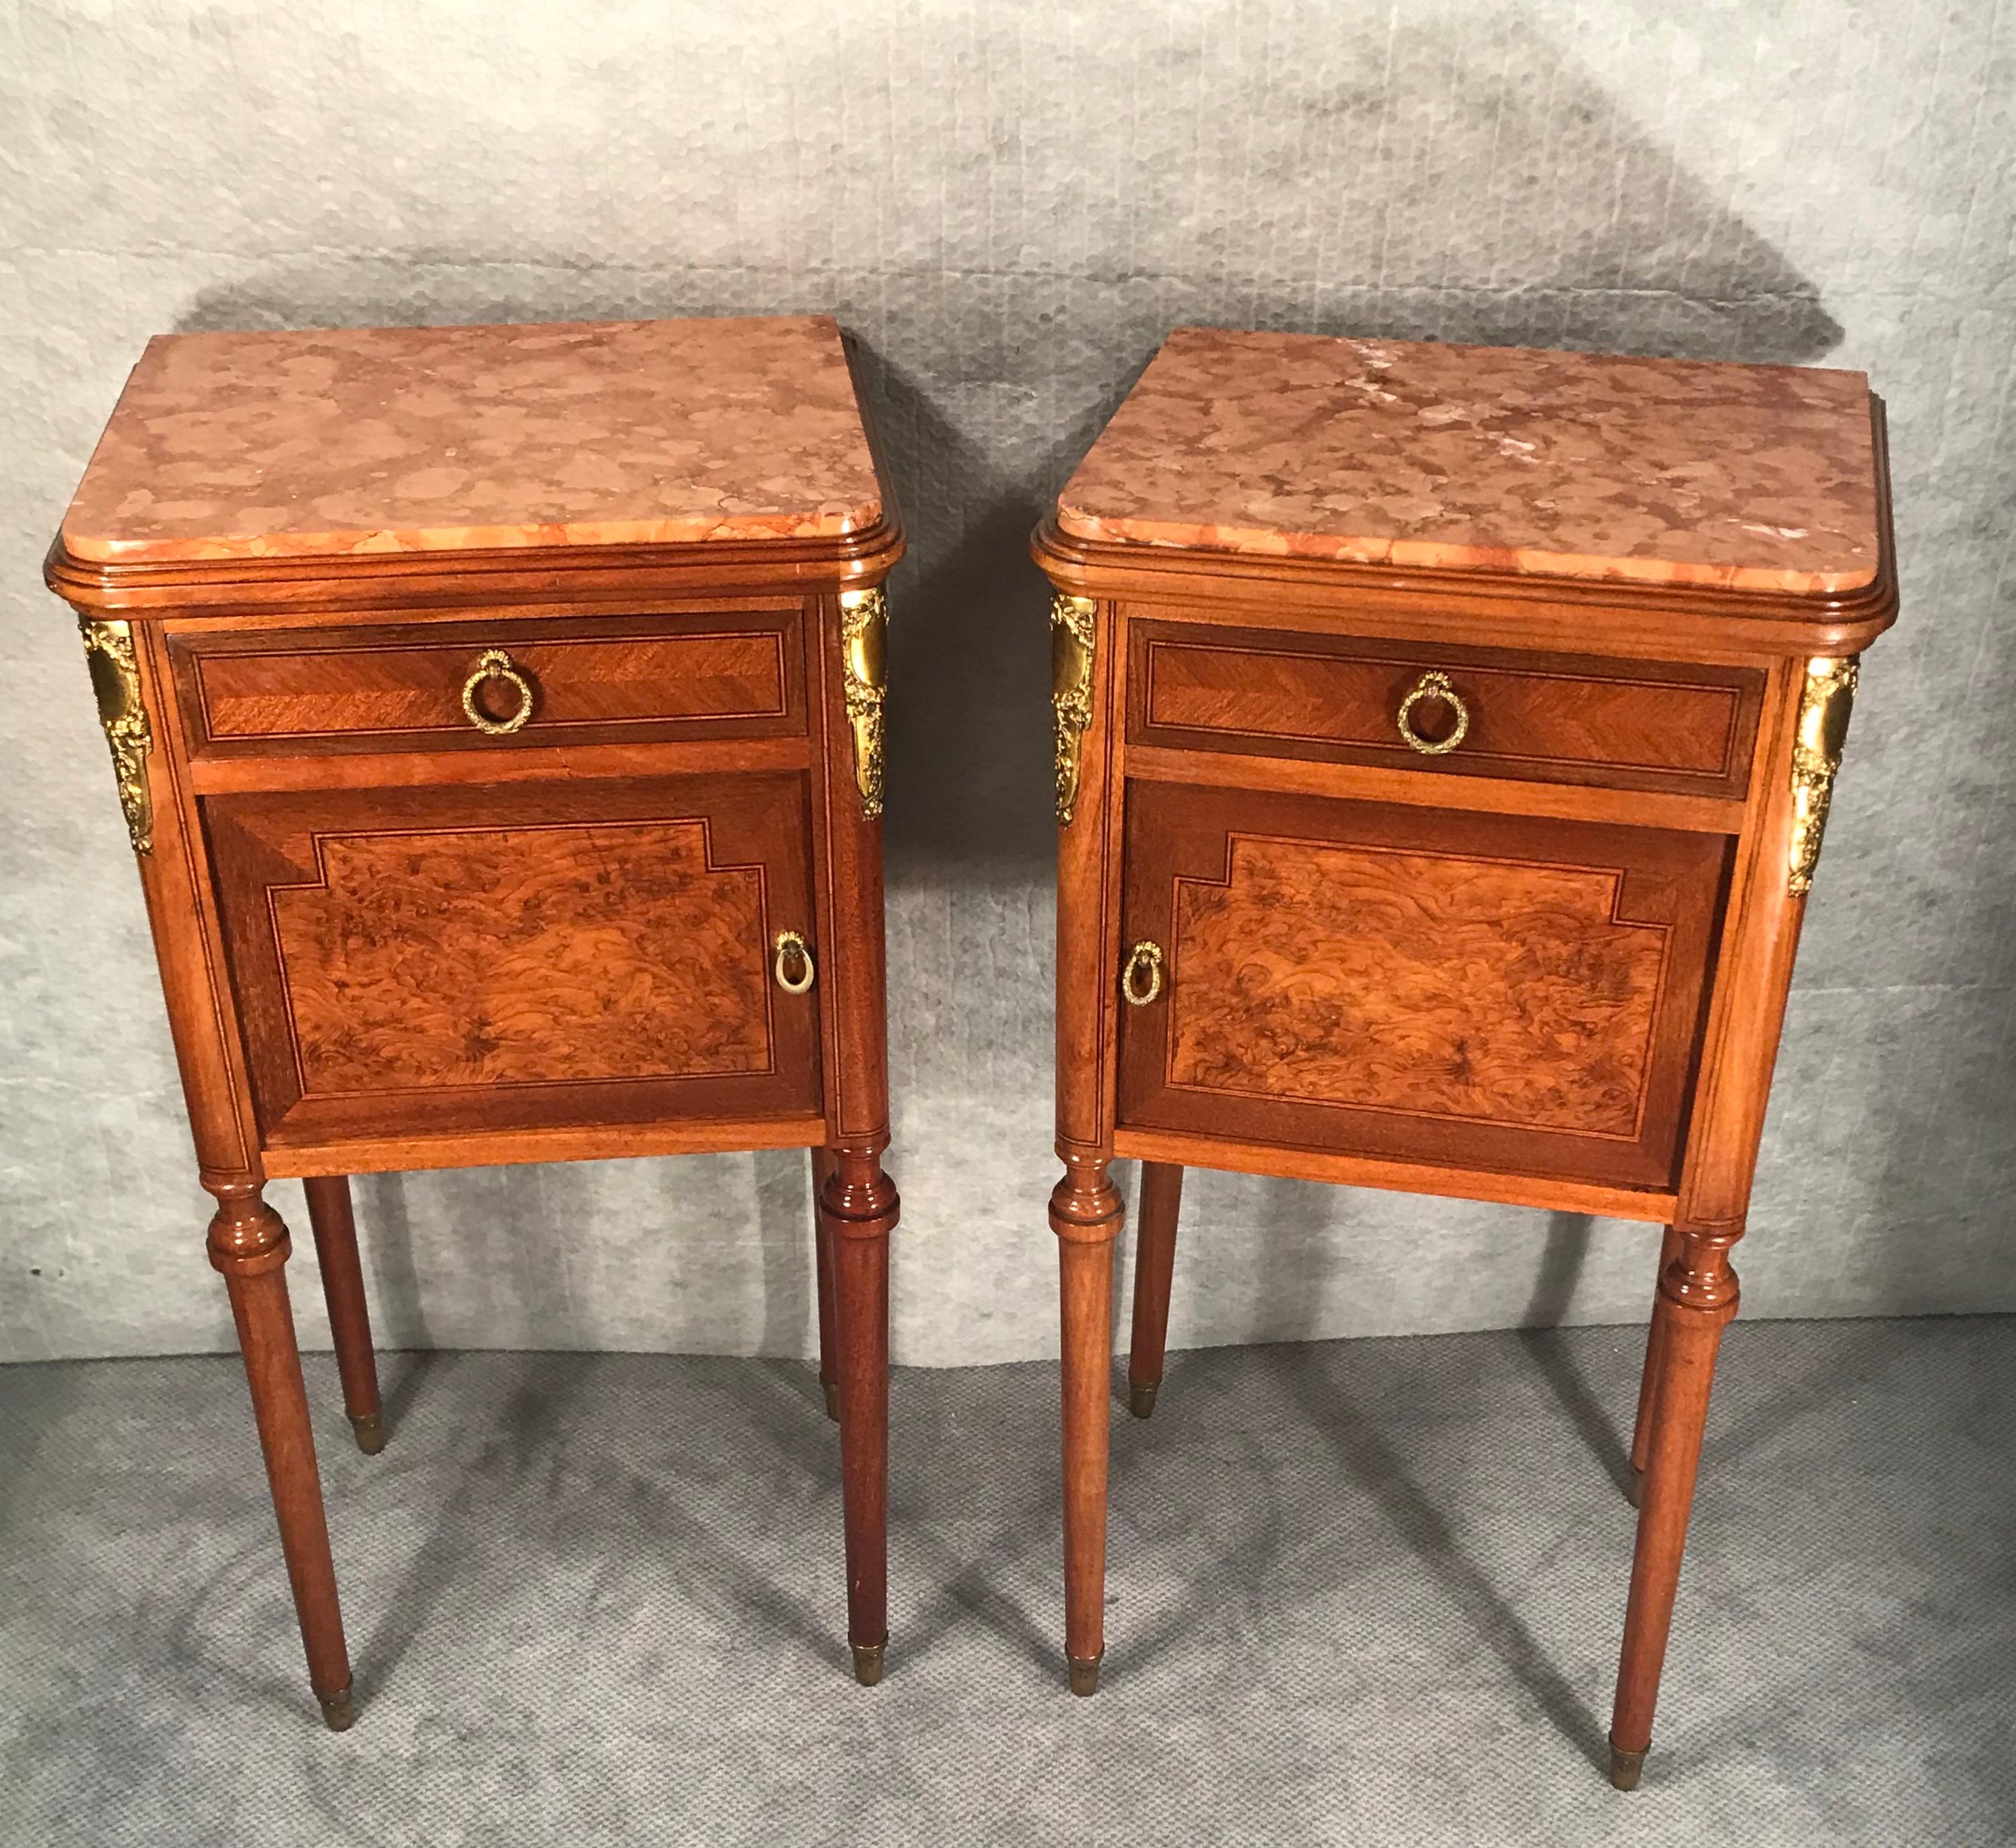 Pair of nightstands in the early Art Nouveau style from France.
The very decorative nightstands date back to around 1890-1900. They are embellished with maple and mahogany veneer. The design still shows some influence from the earlier Napoleon III